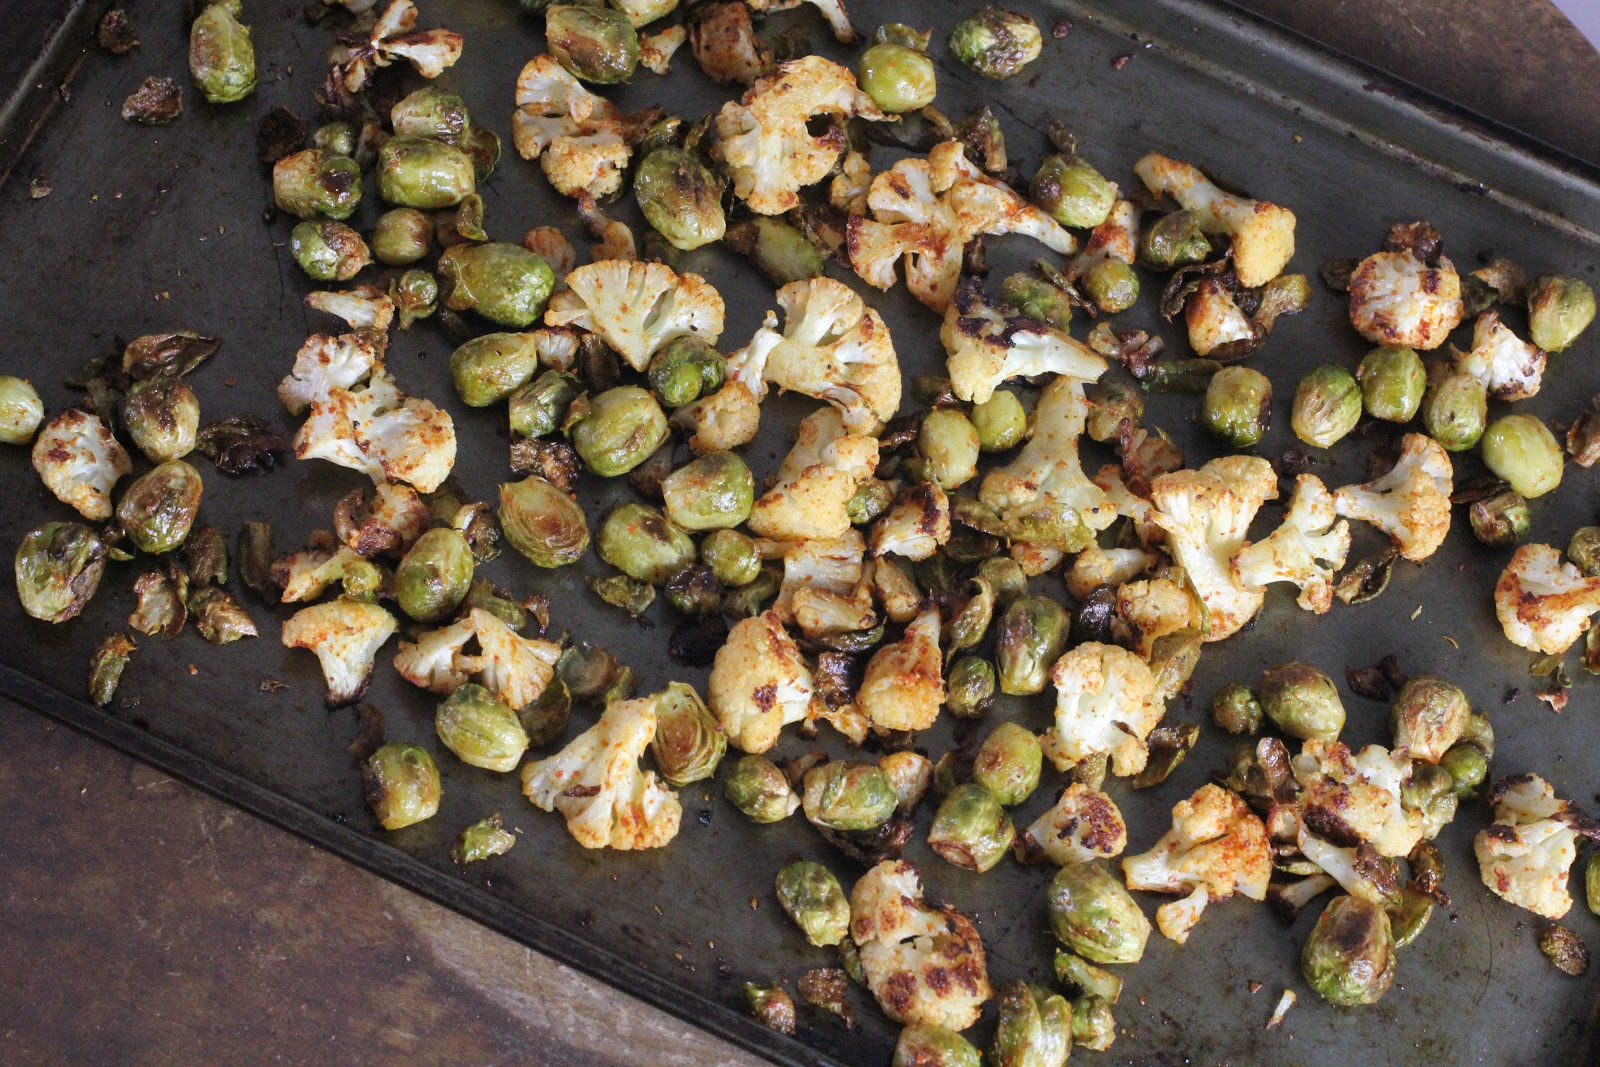 vangi baath roasted brussels sprouts and cauliflower